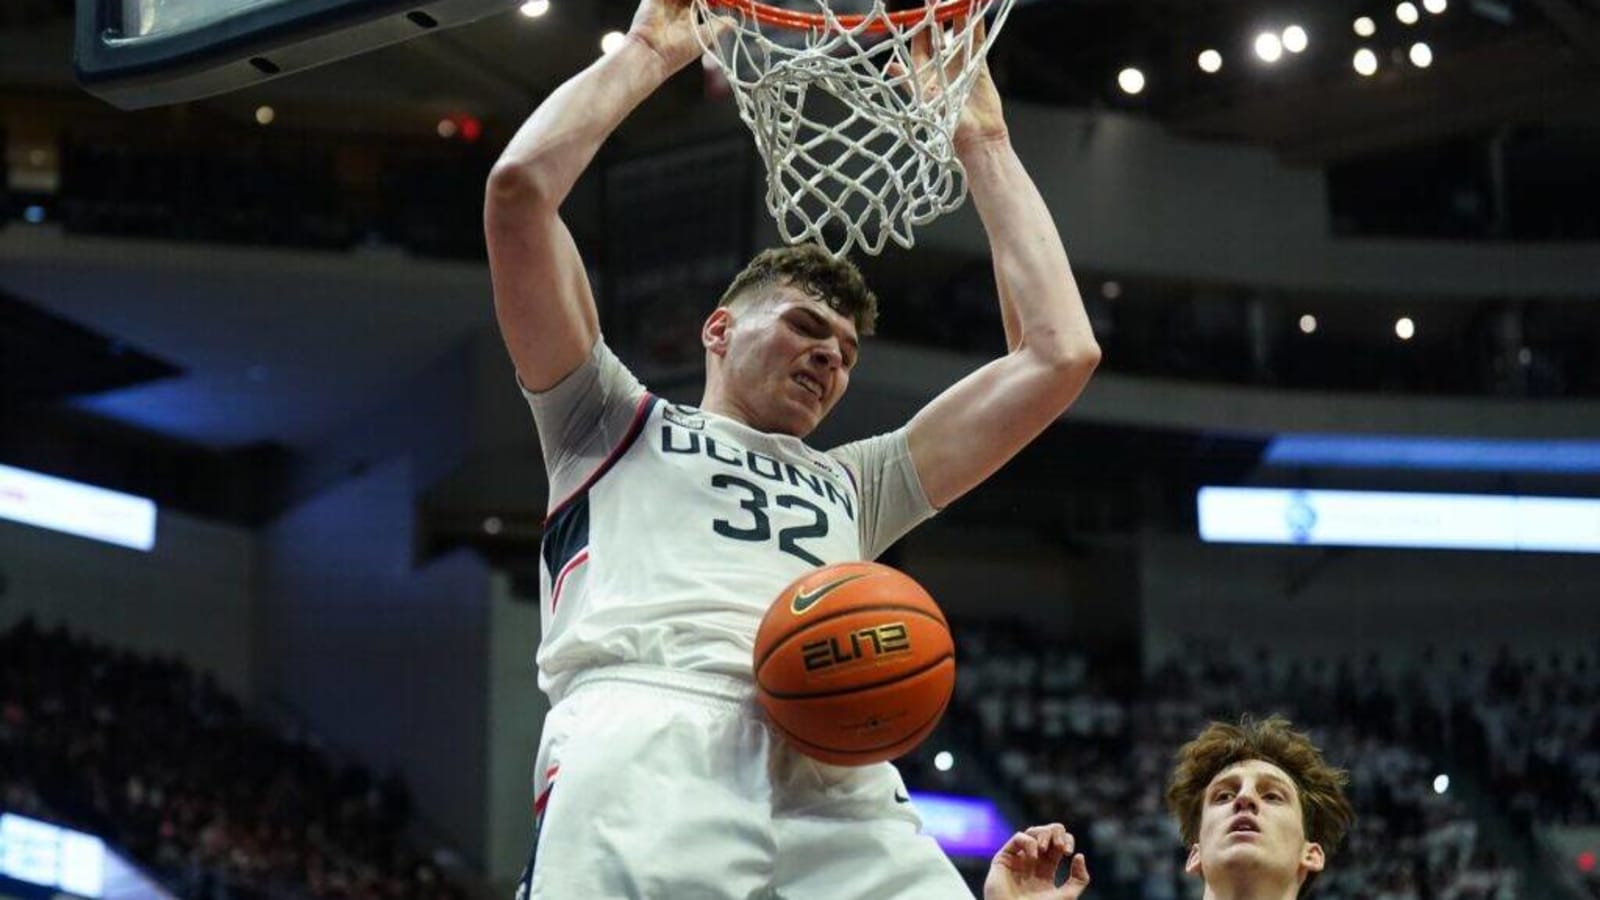 Donovan Clingan Focusing On Staying Out Of Foul Trouble